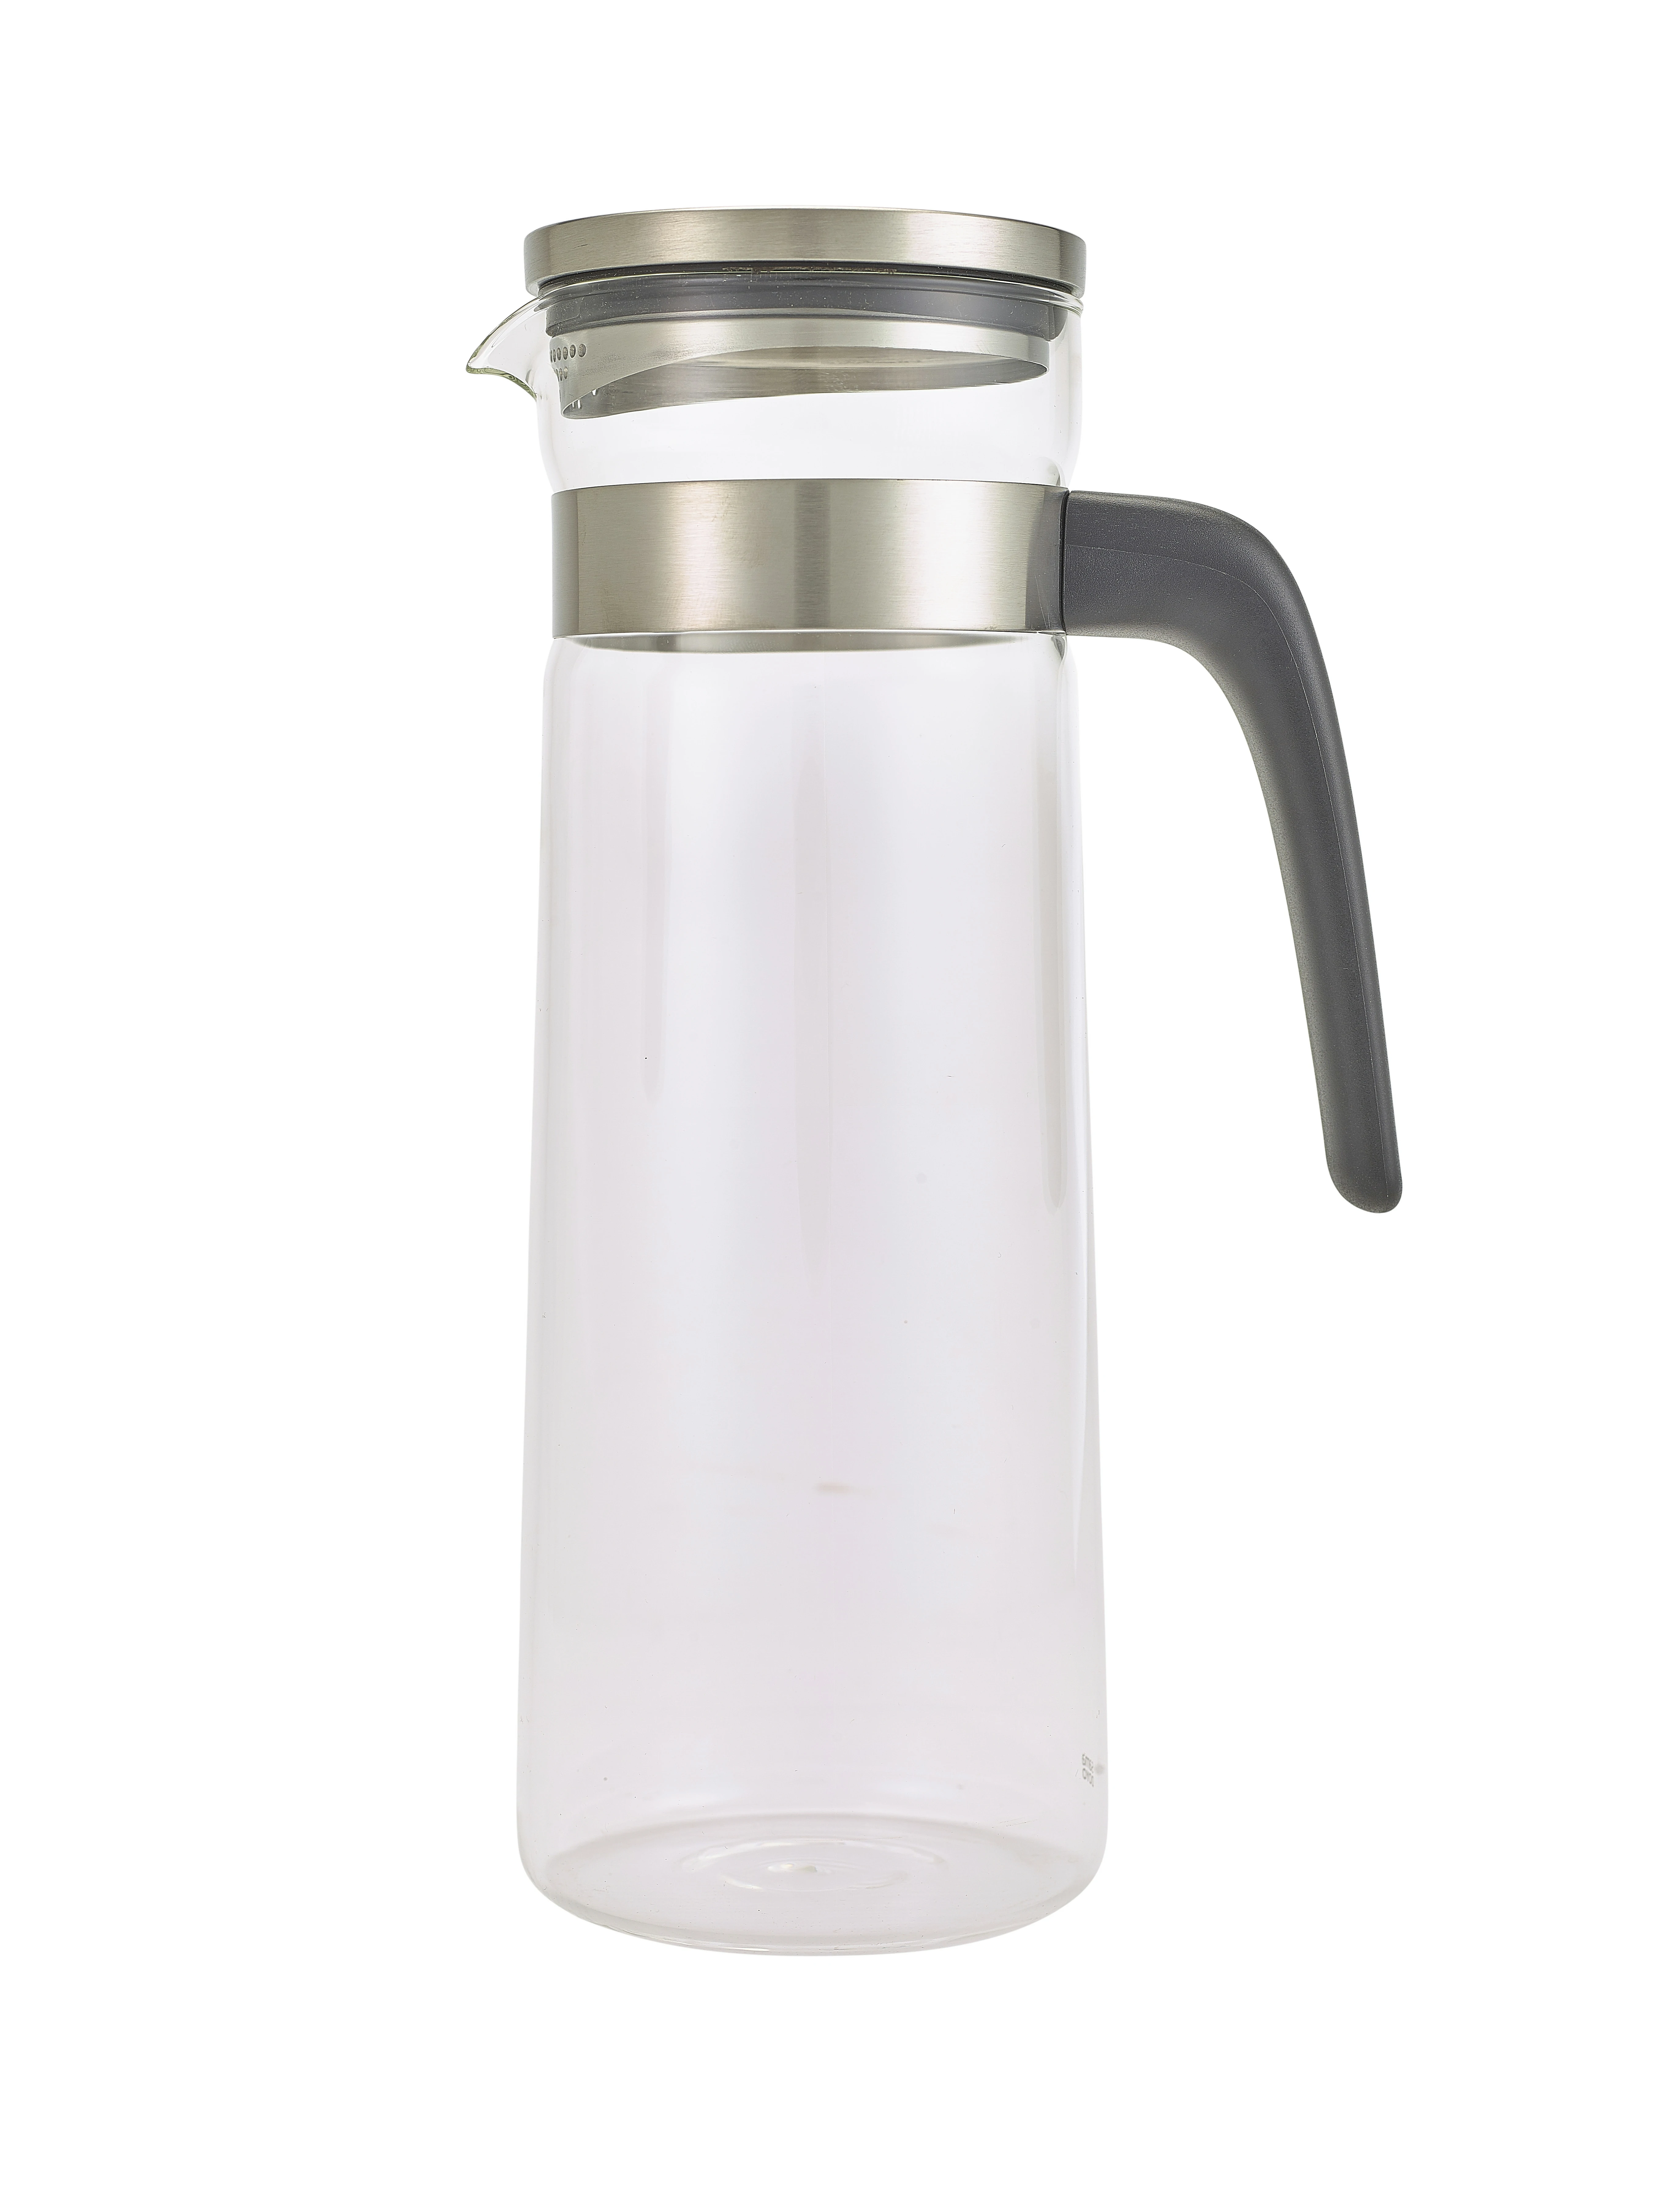 Glass Water Jug With Stainless Steel Lid 1.5L/52.5oz